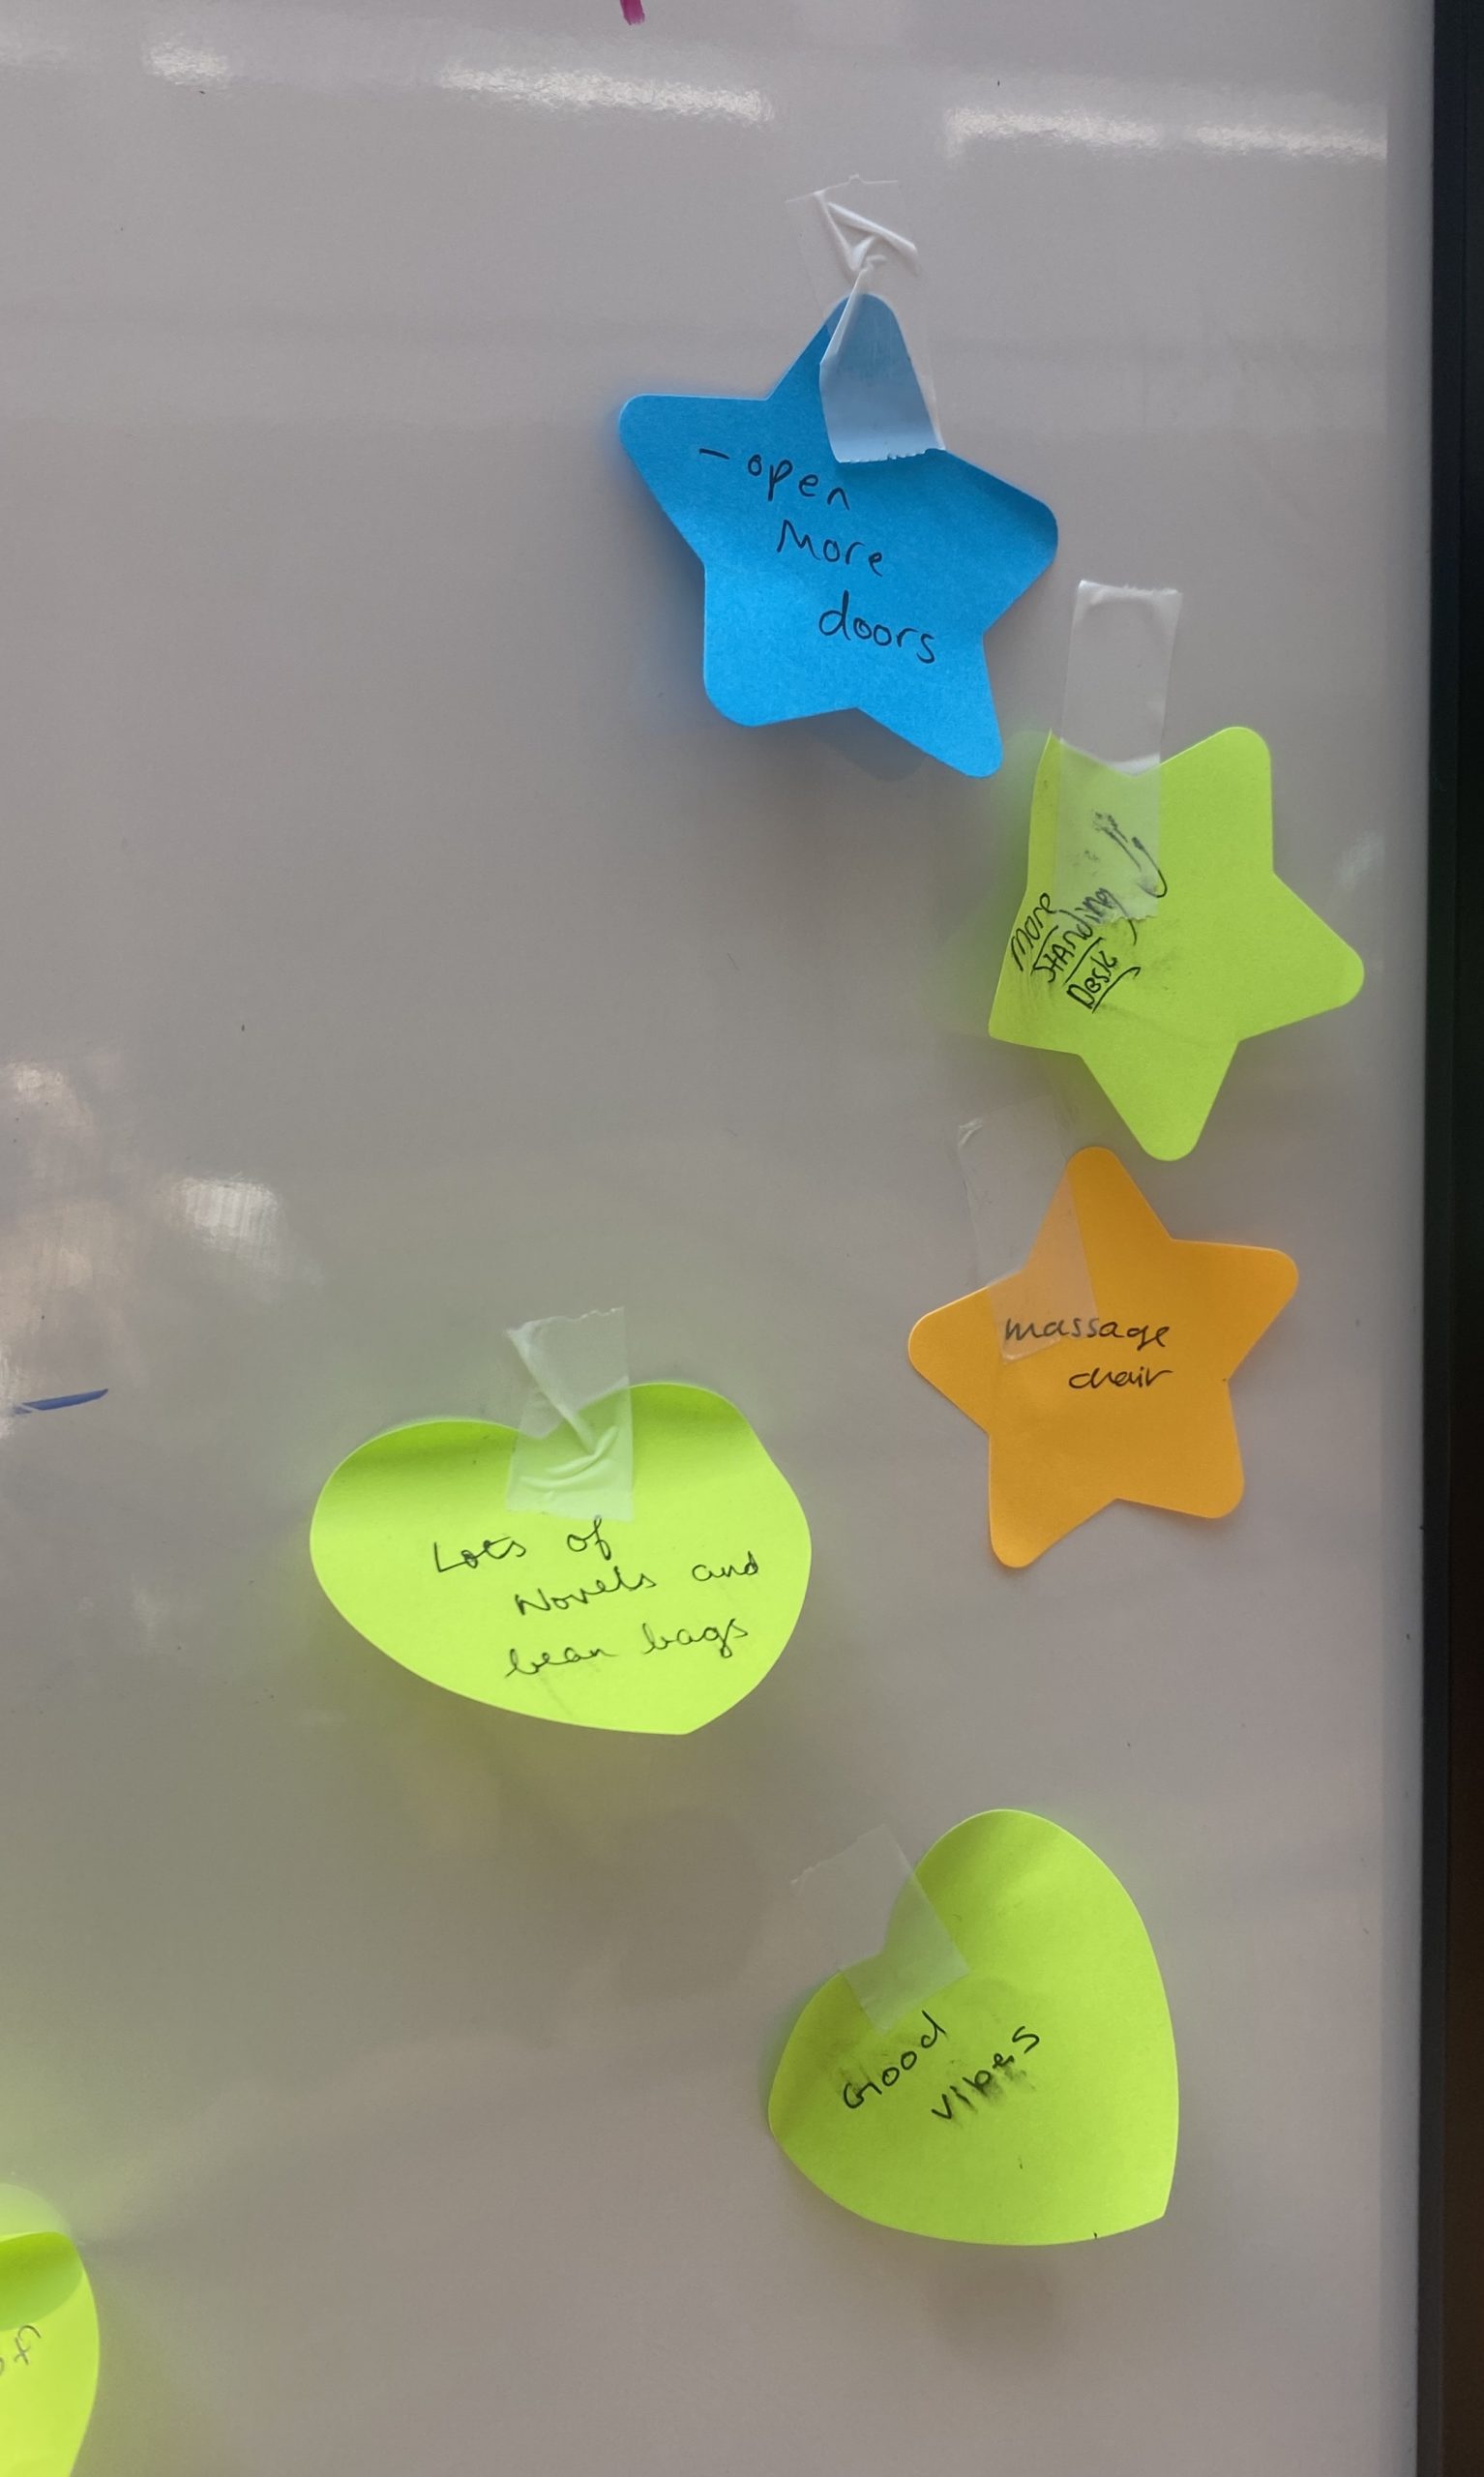 Sticky notes on a white board with ideas from students.